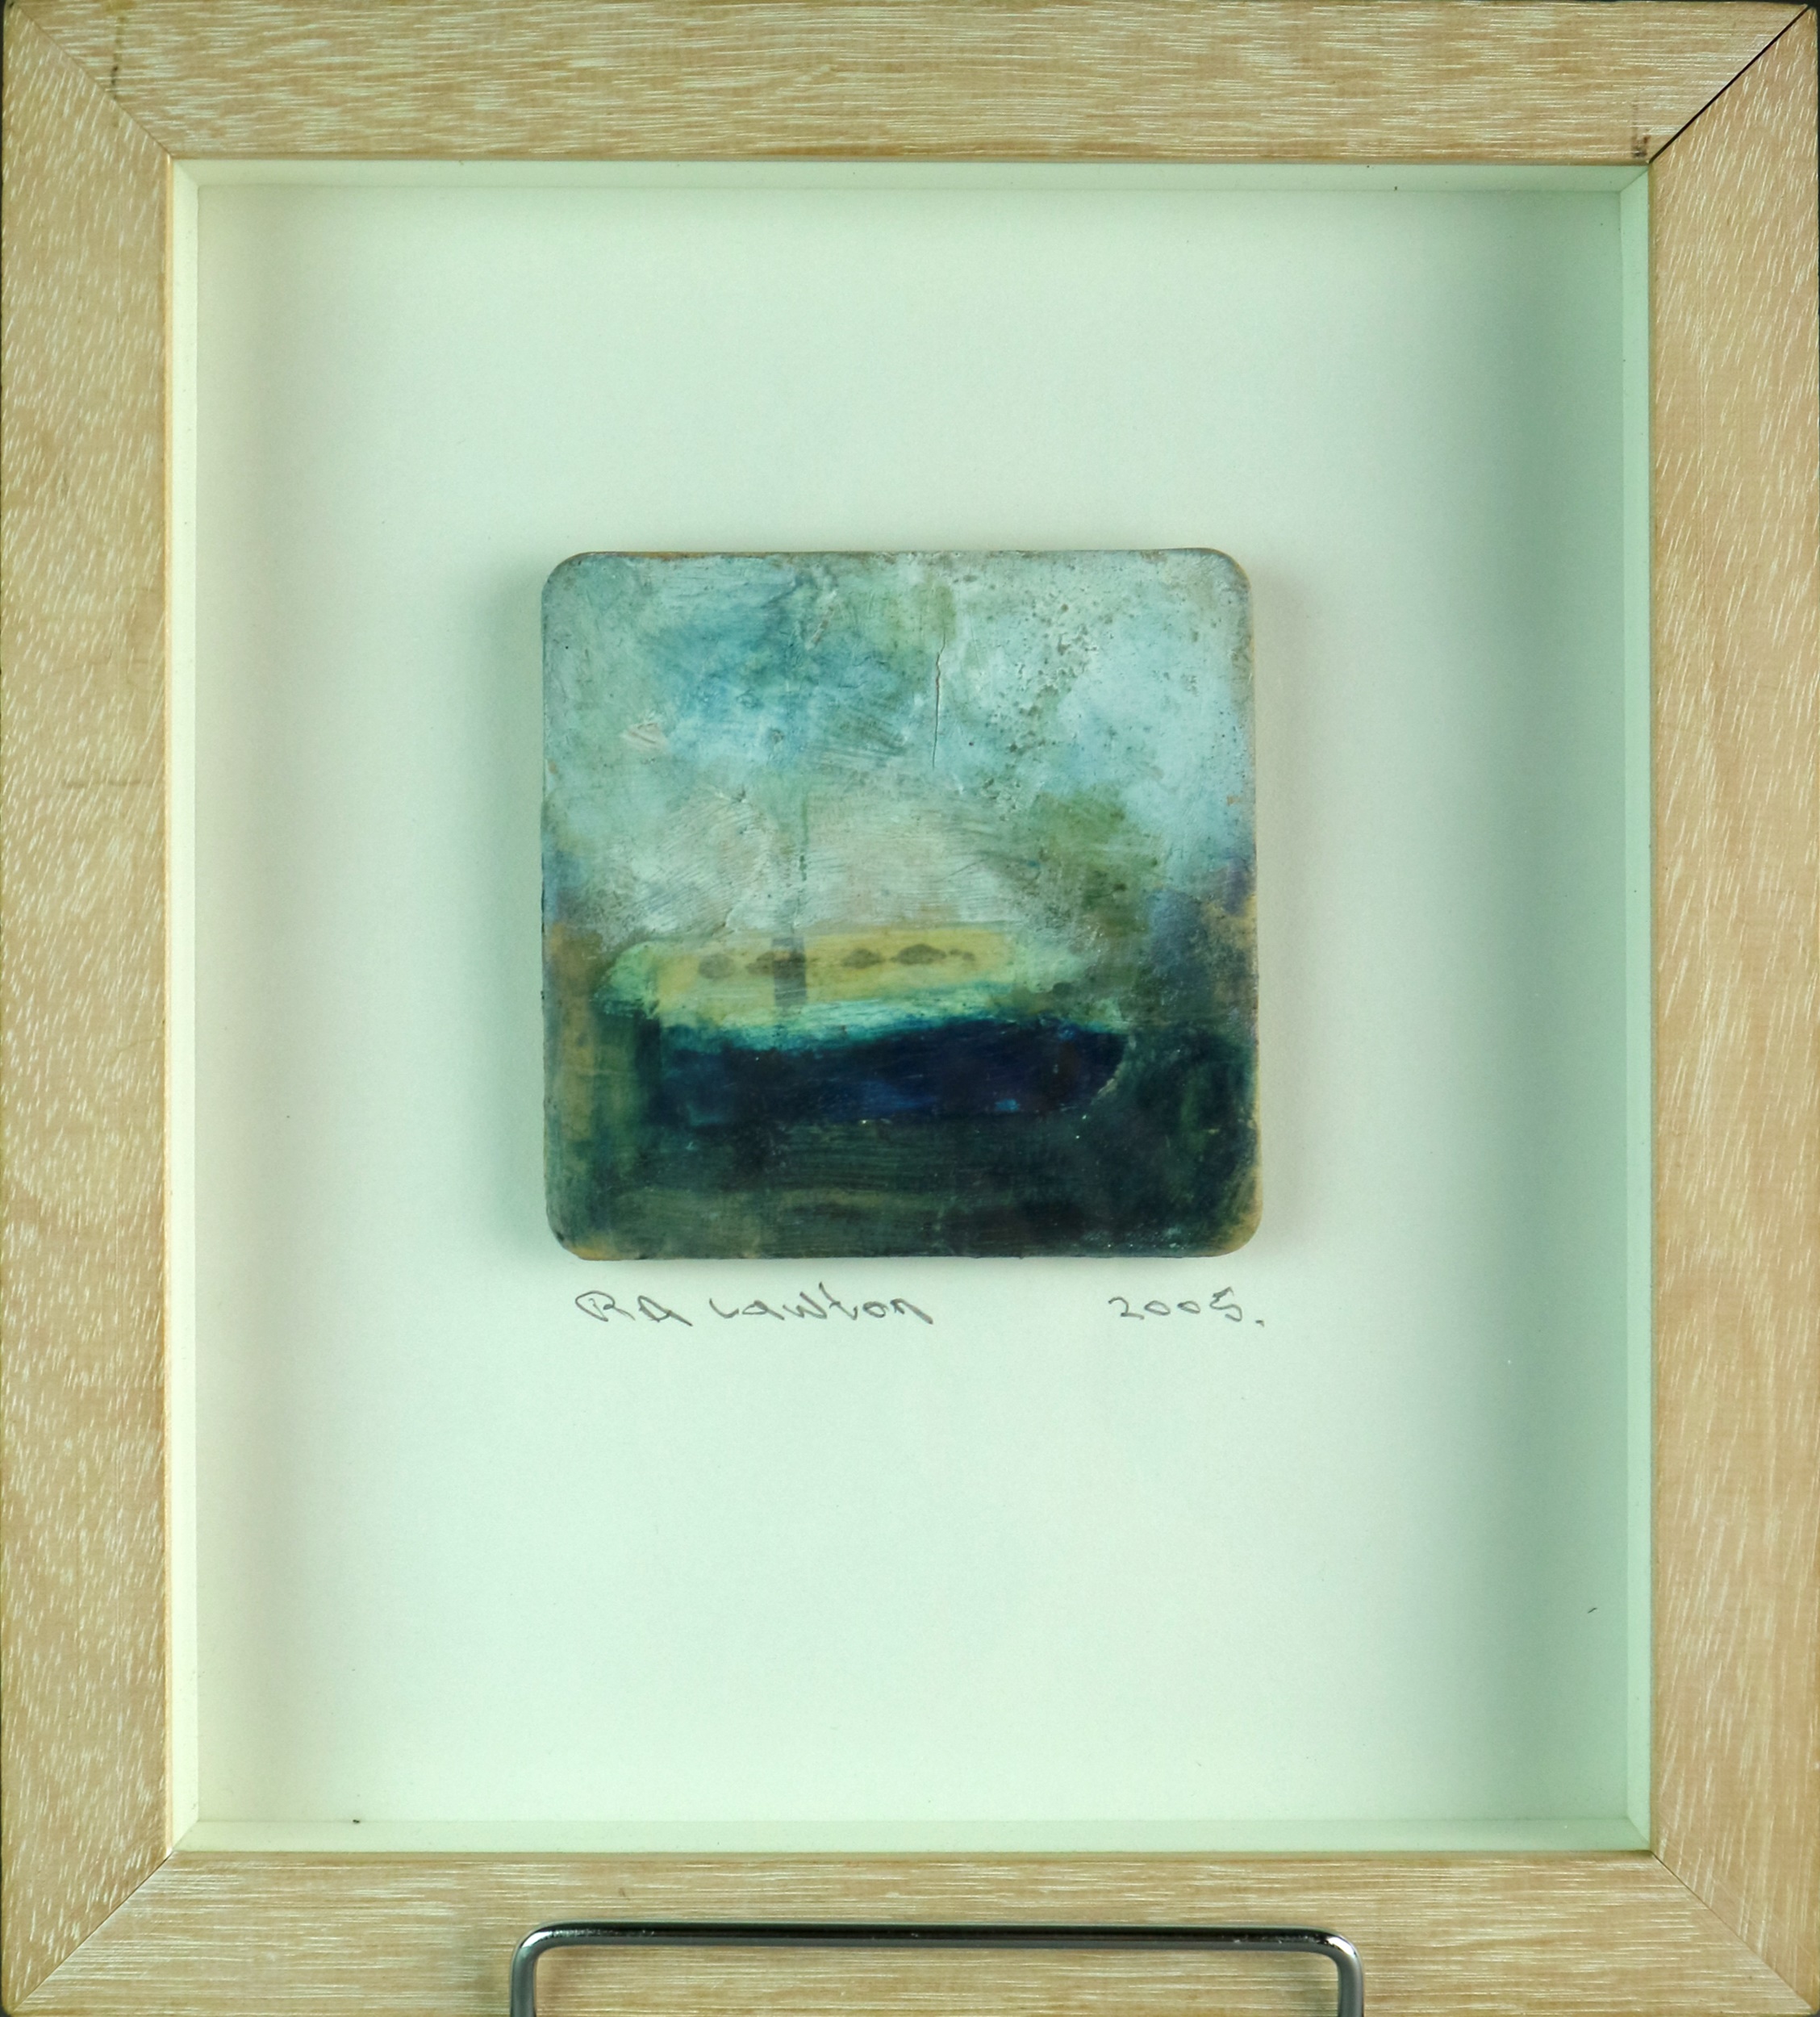 Richard Lawton (Irish School b.1969) Castleboat, signed and dated 2005 in pencil, oil on card, - Image 3 of 6